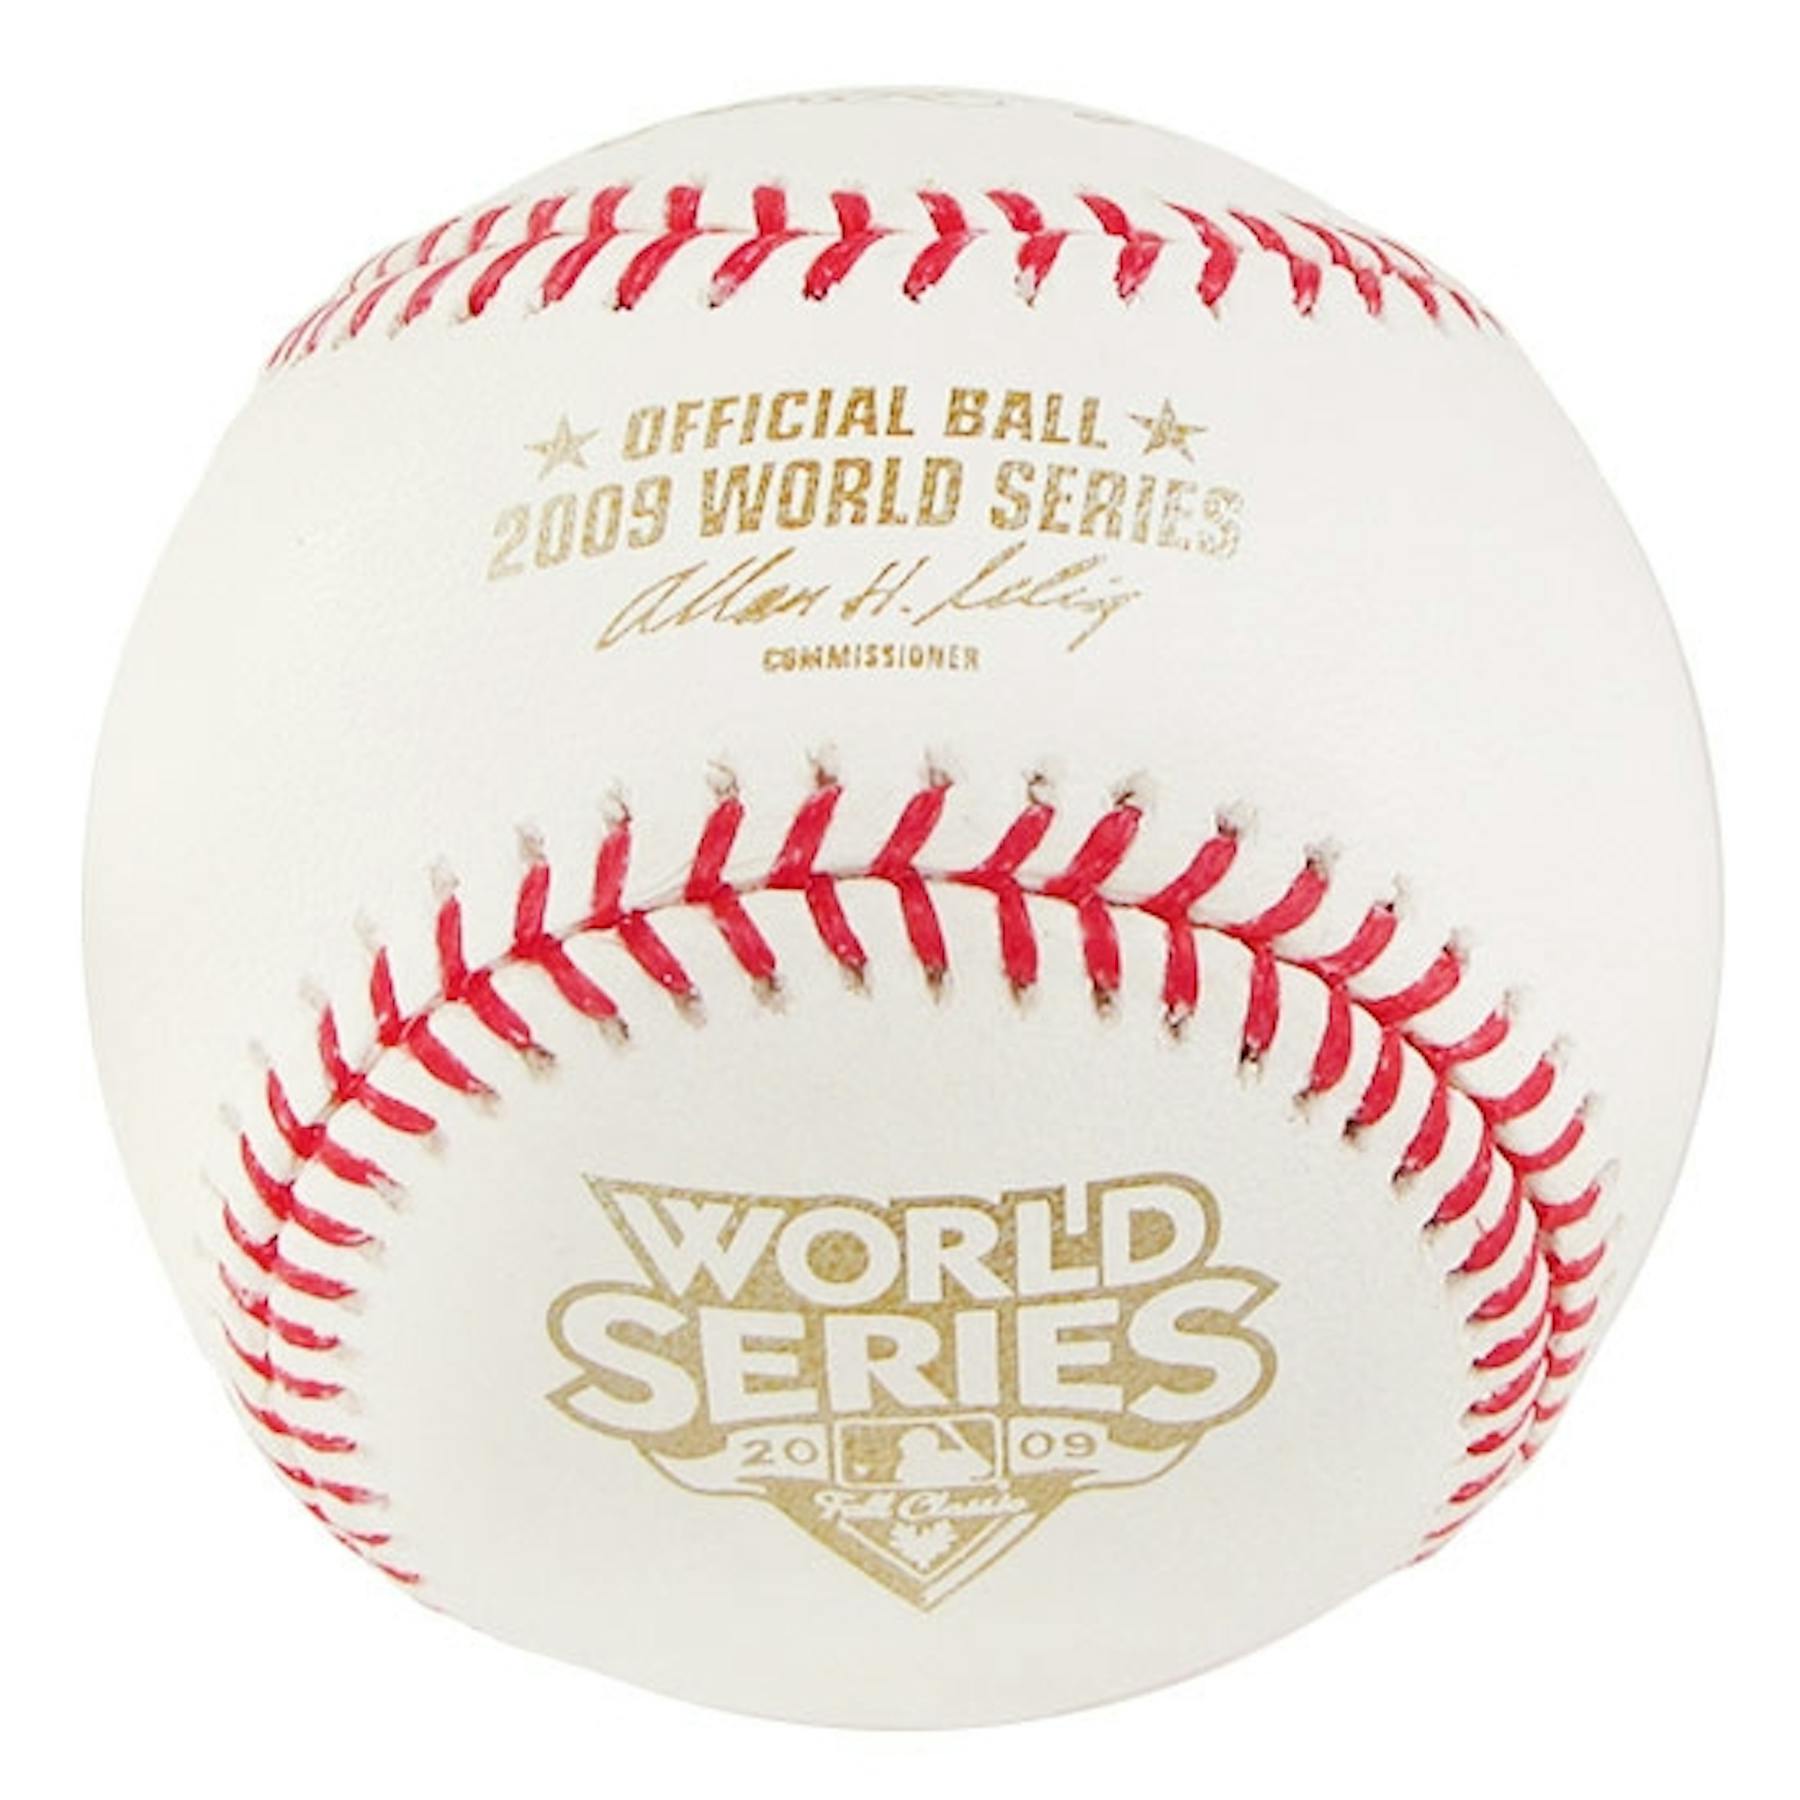 Rawlings 2009 World Series Commemorative Official Baseball Slightly Stained Da Card World